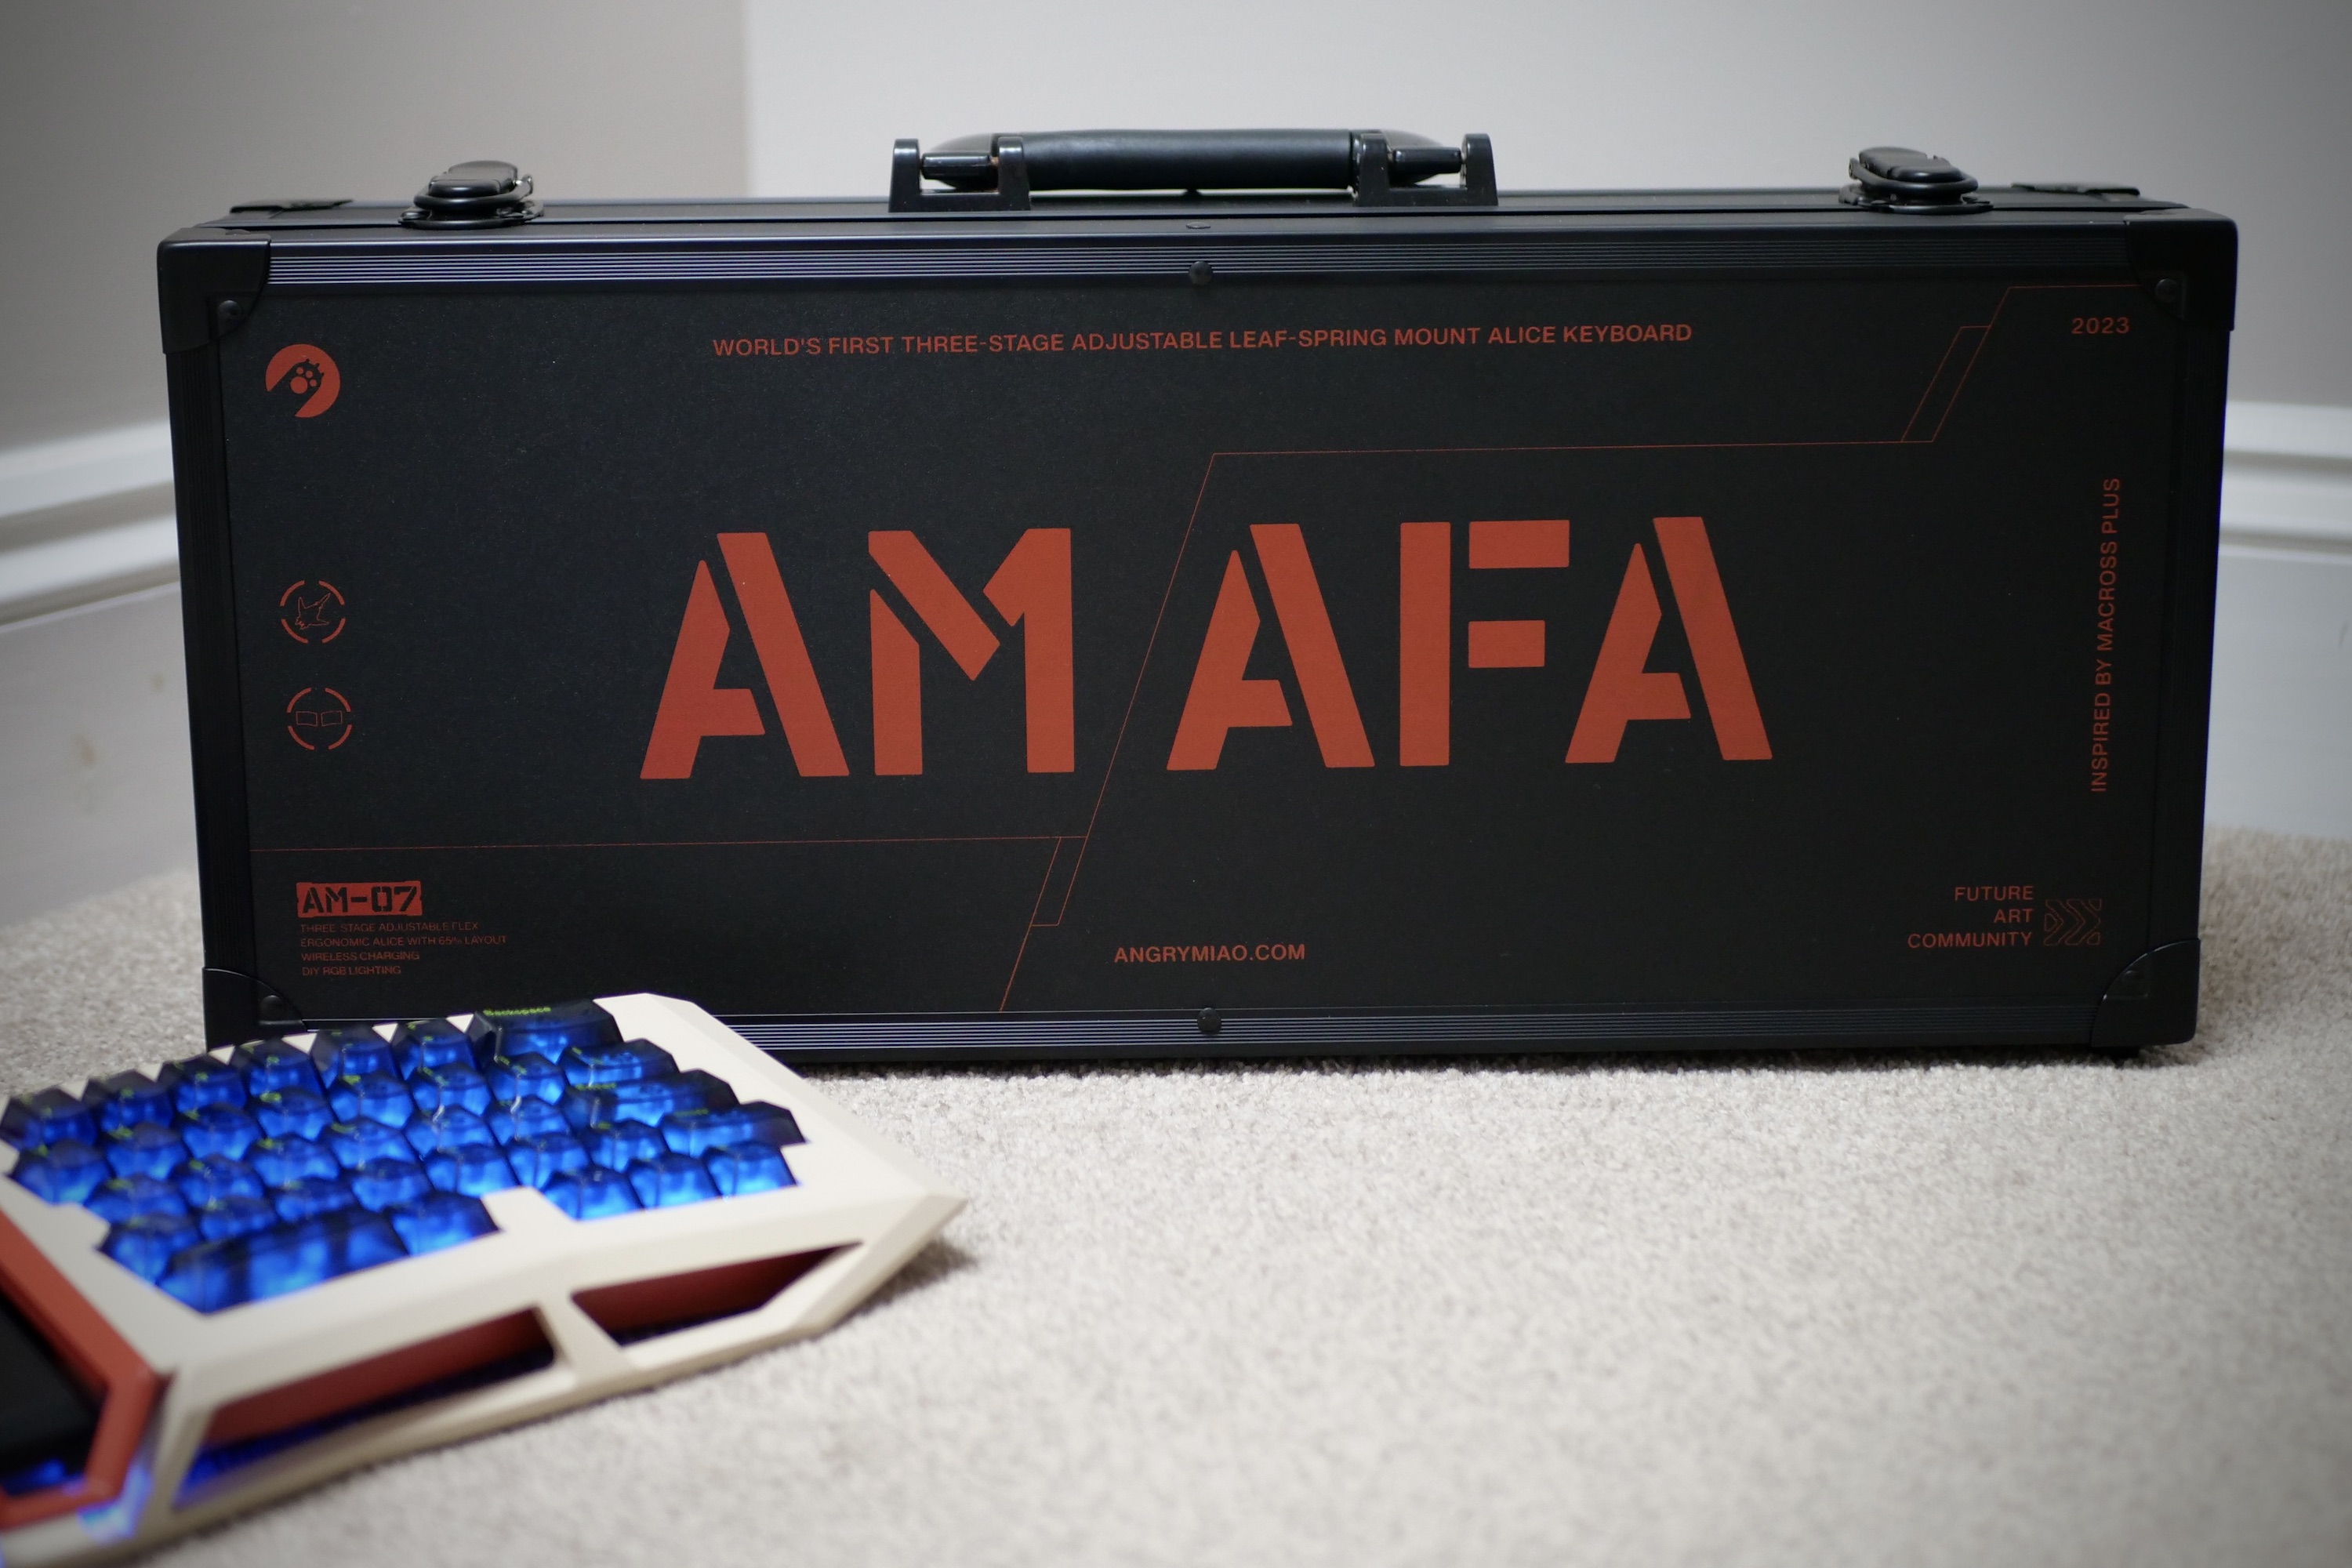 The Angry Miao AM AFA R2 keyboard's case.